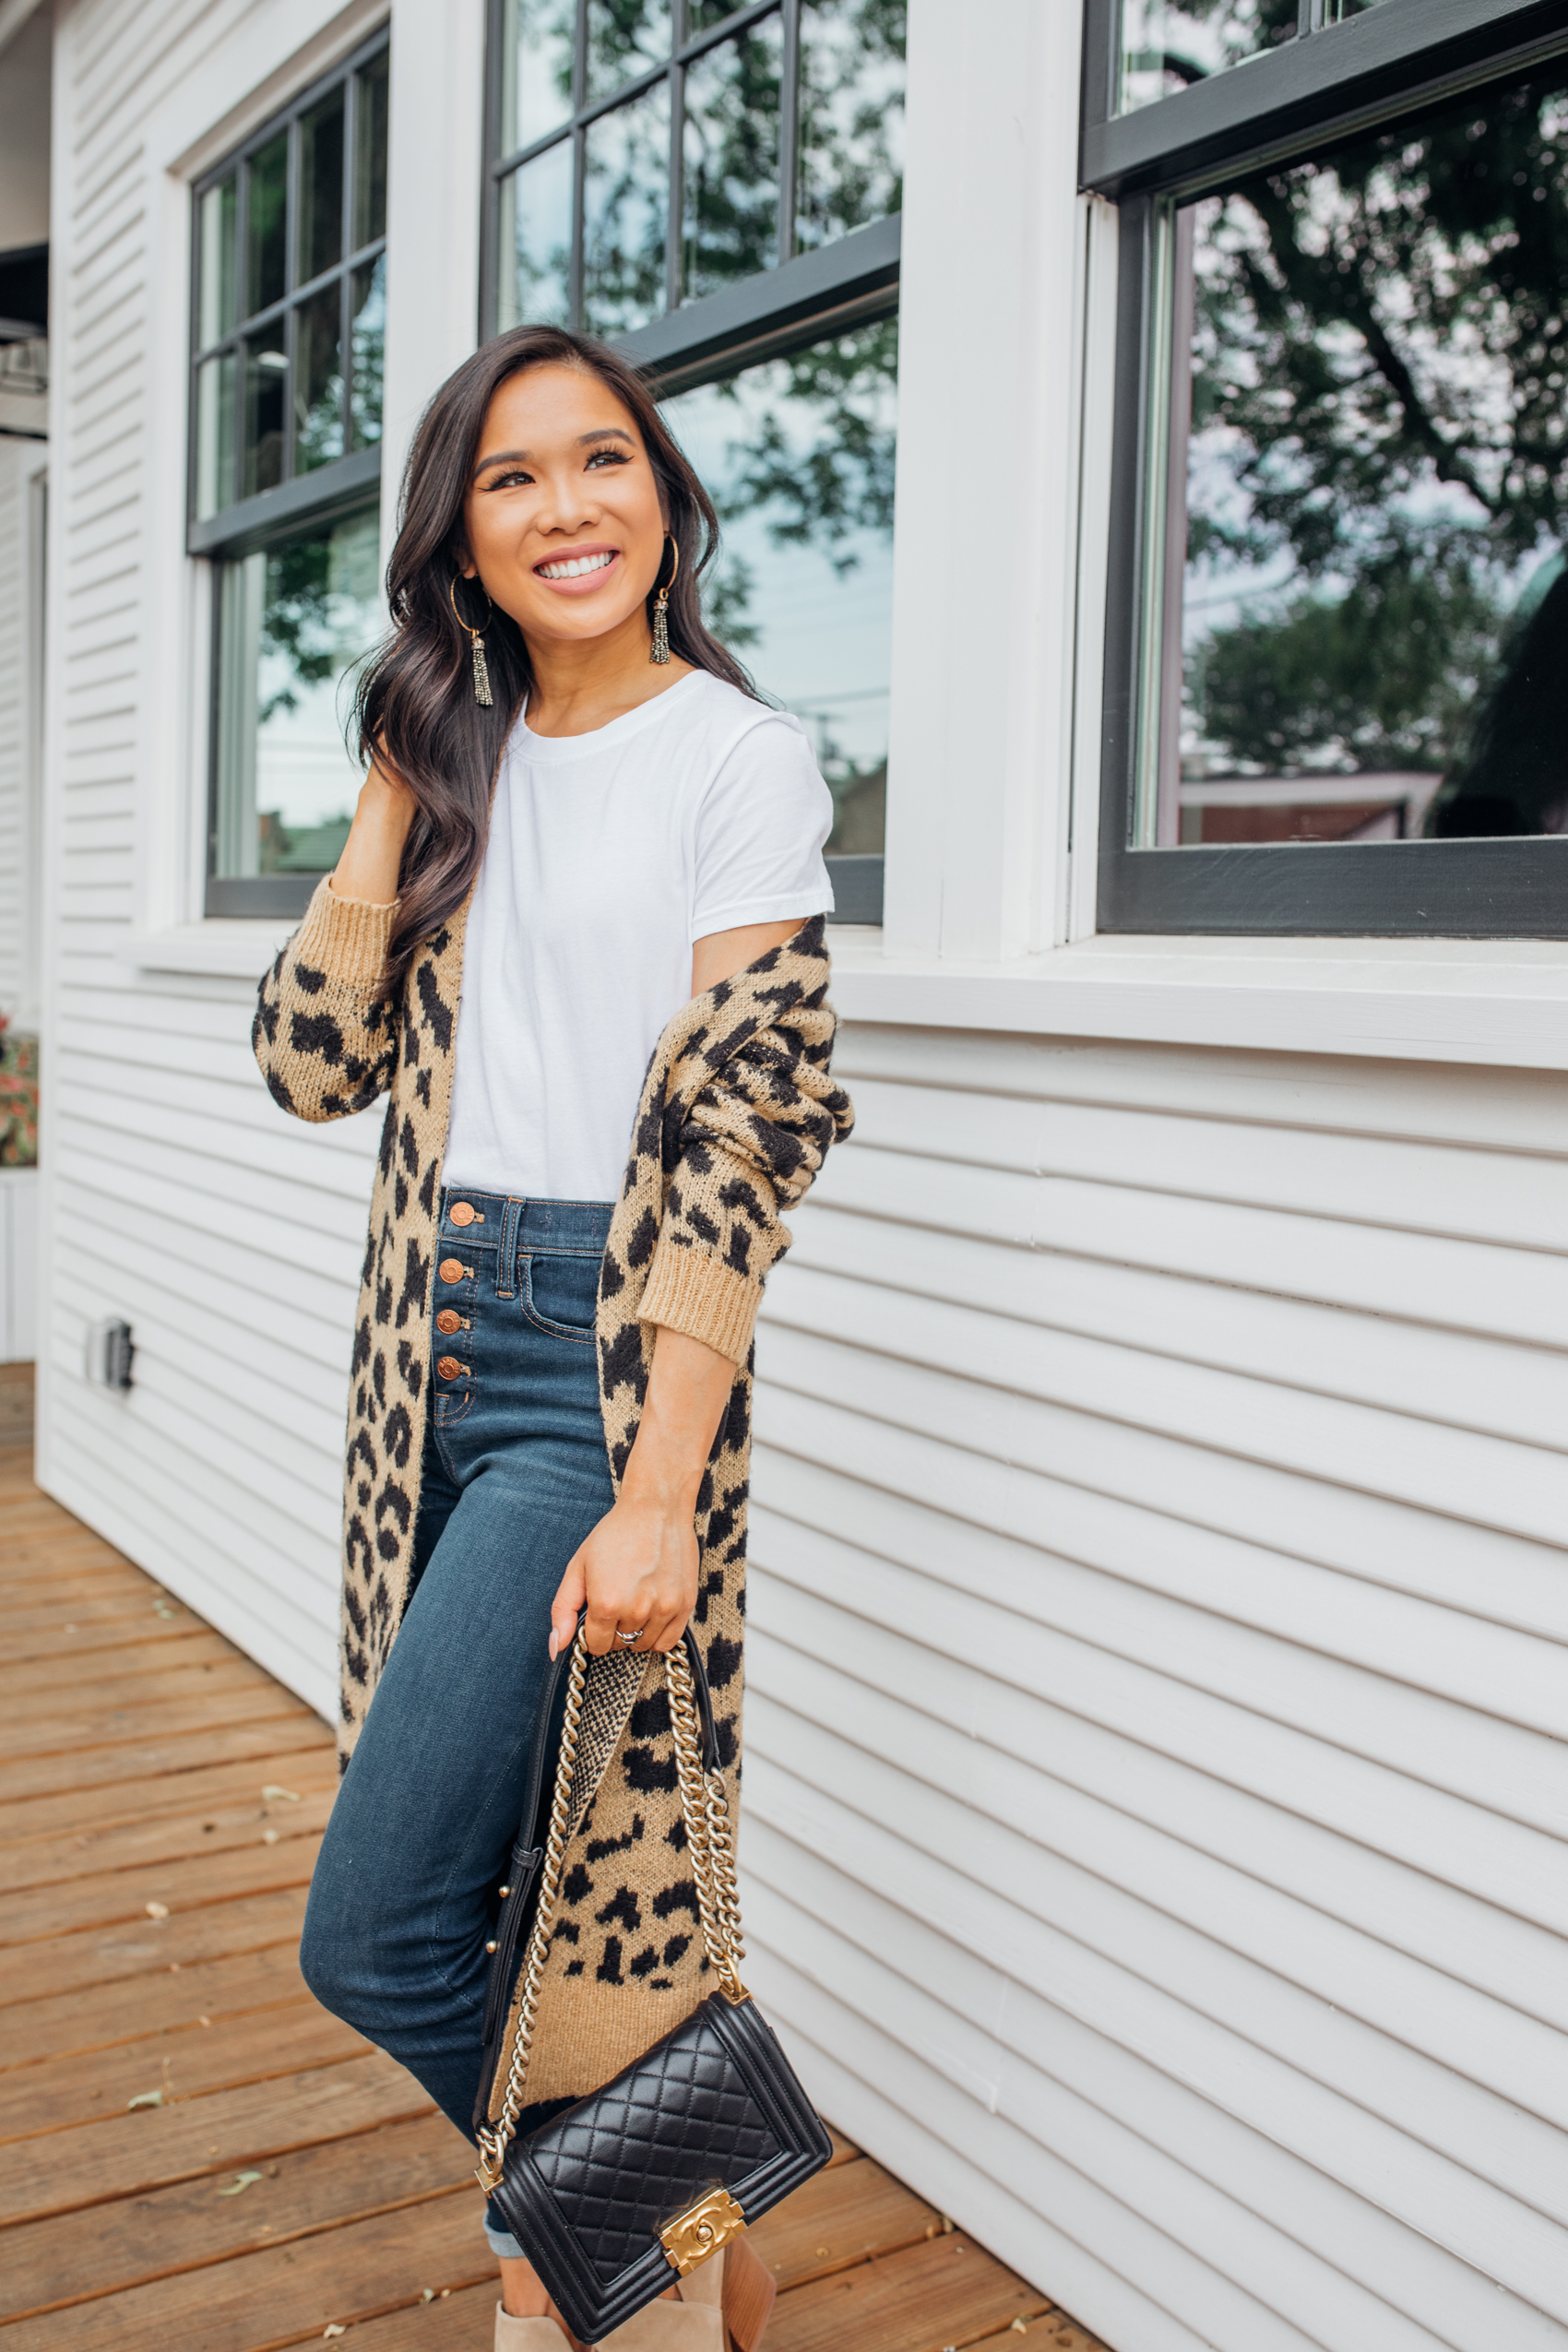 Styling a leopard cardigan outfit for summer into fall